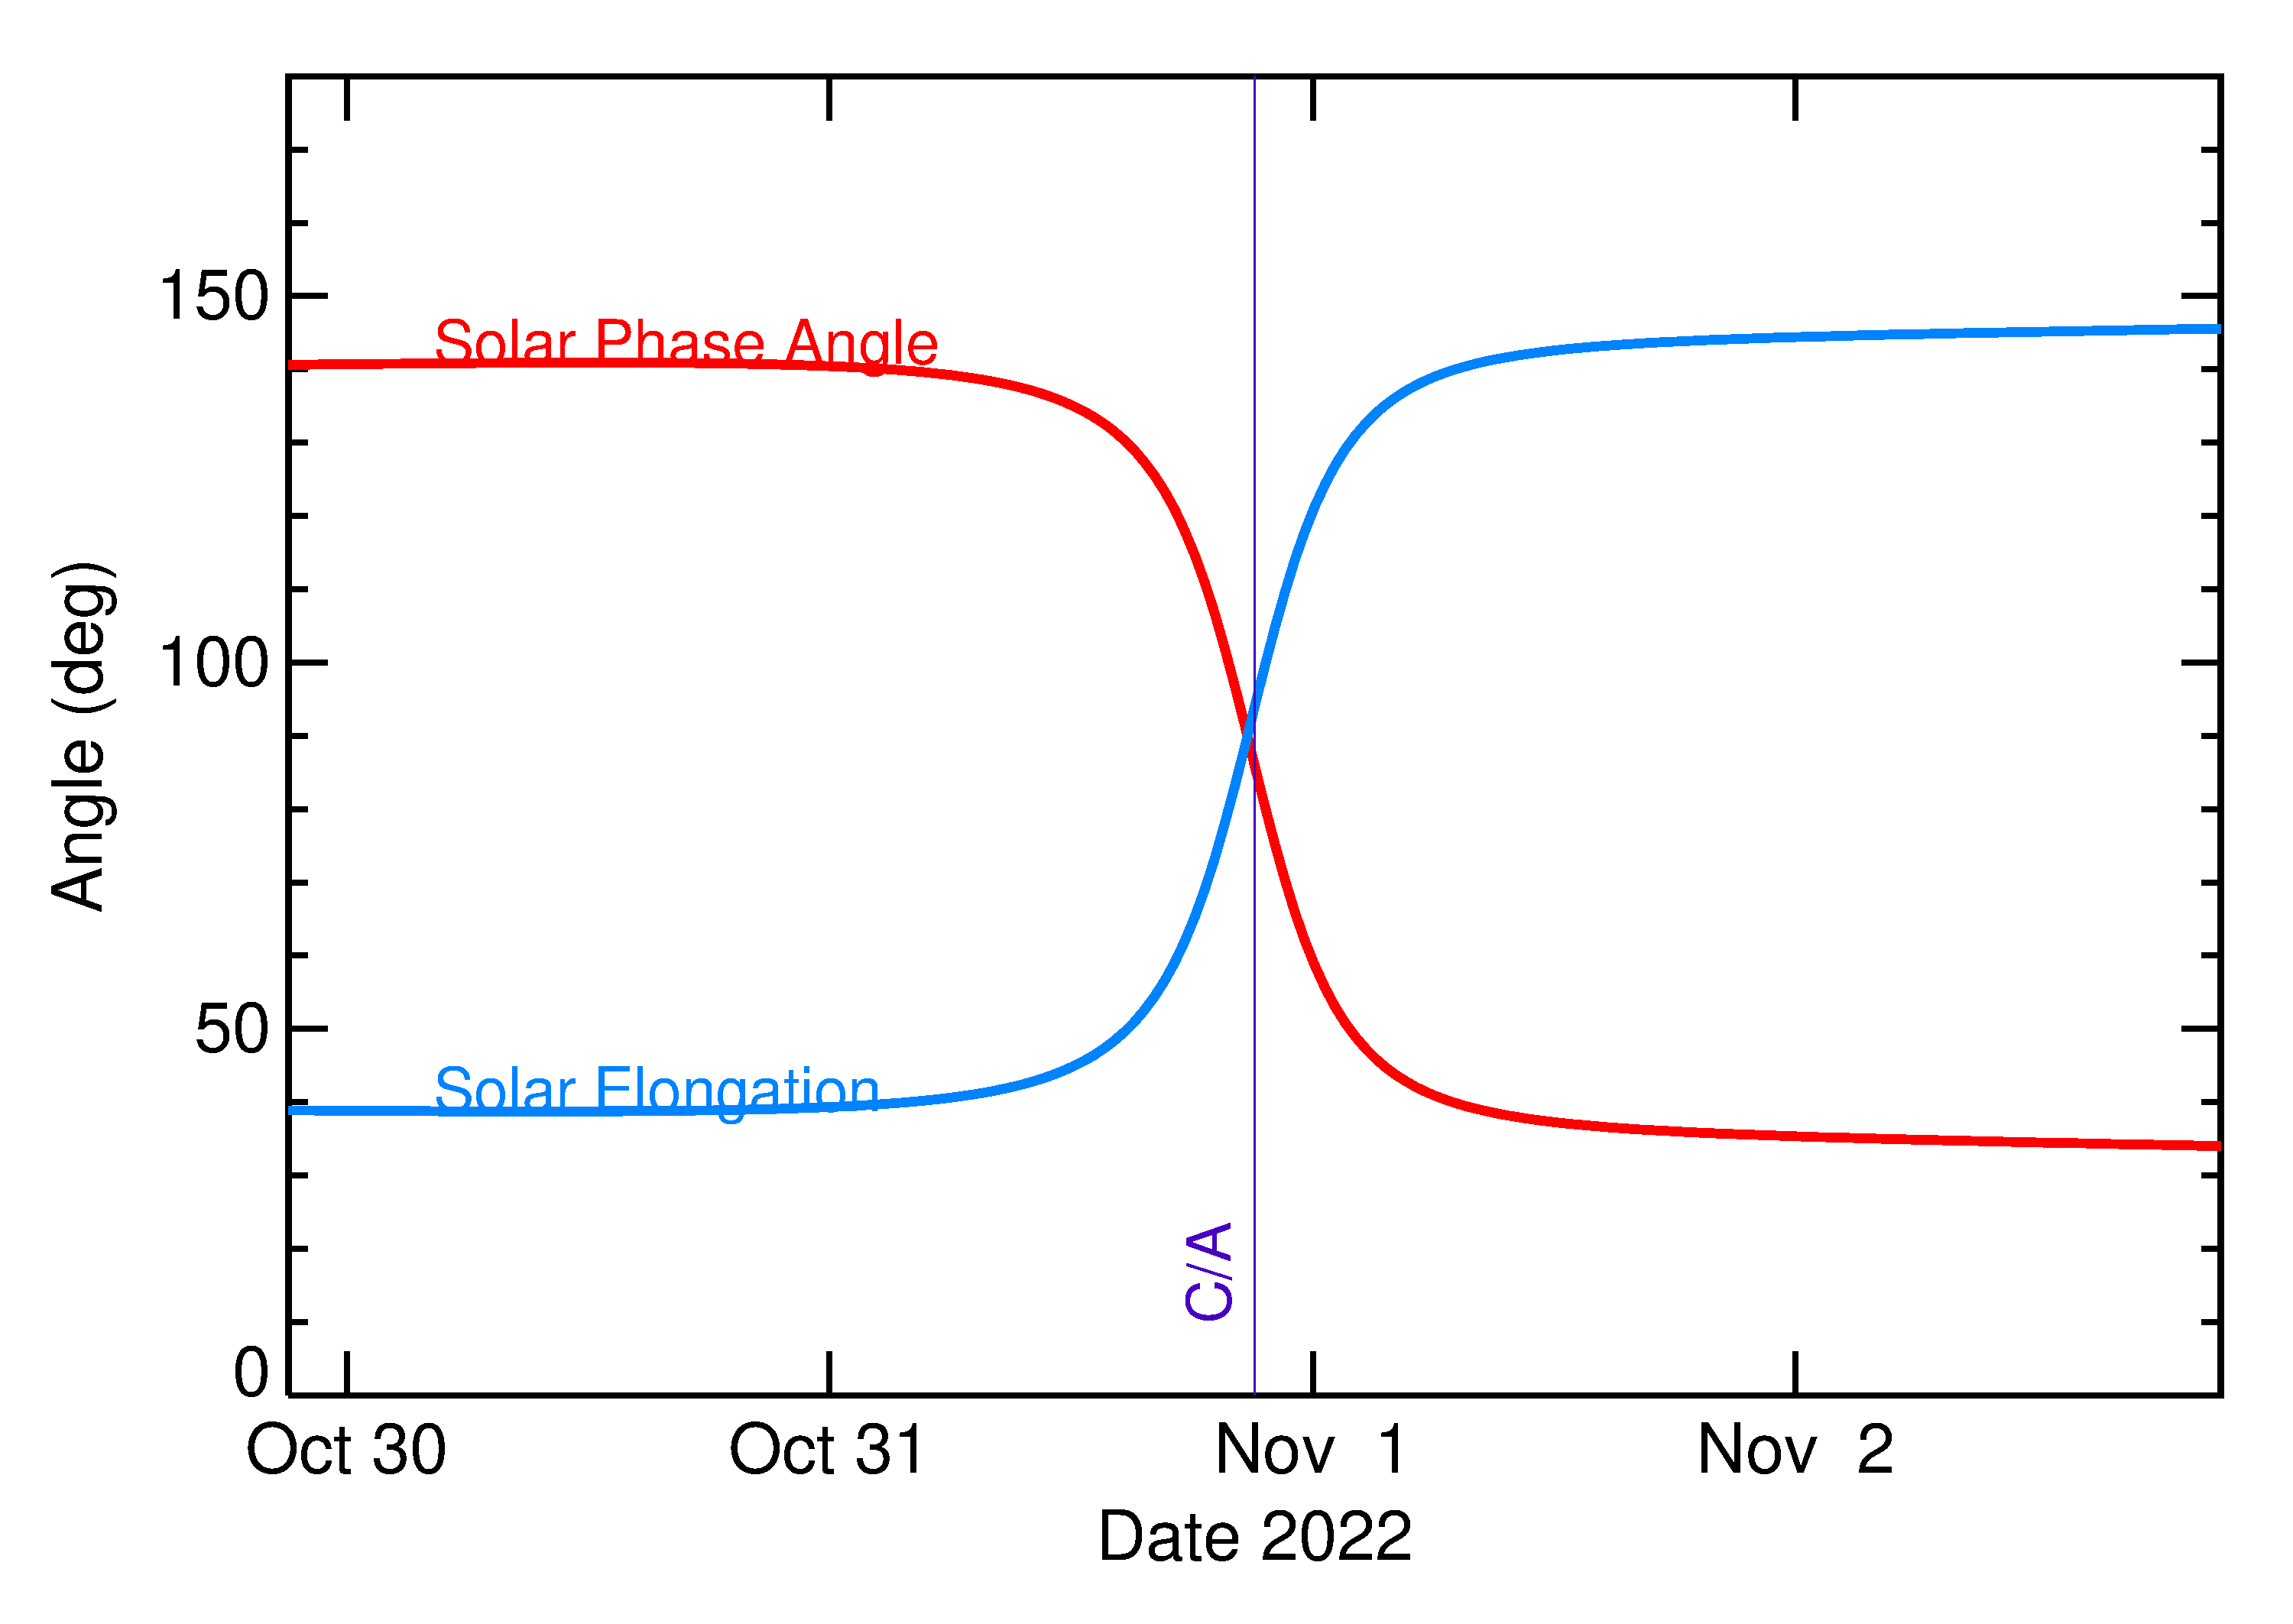 Solar Elongation and Solar Phase Angle of 2022 VG1 in the days around closest approach